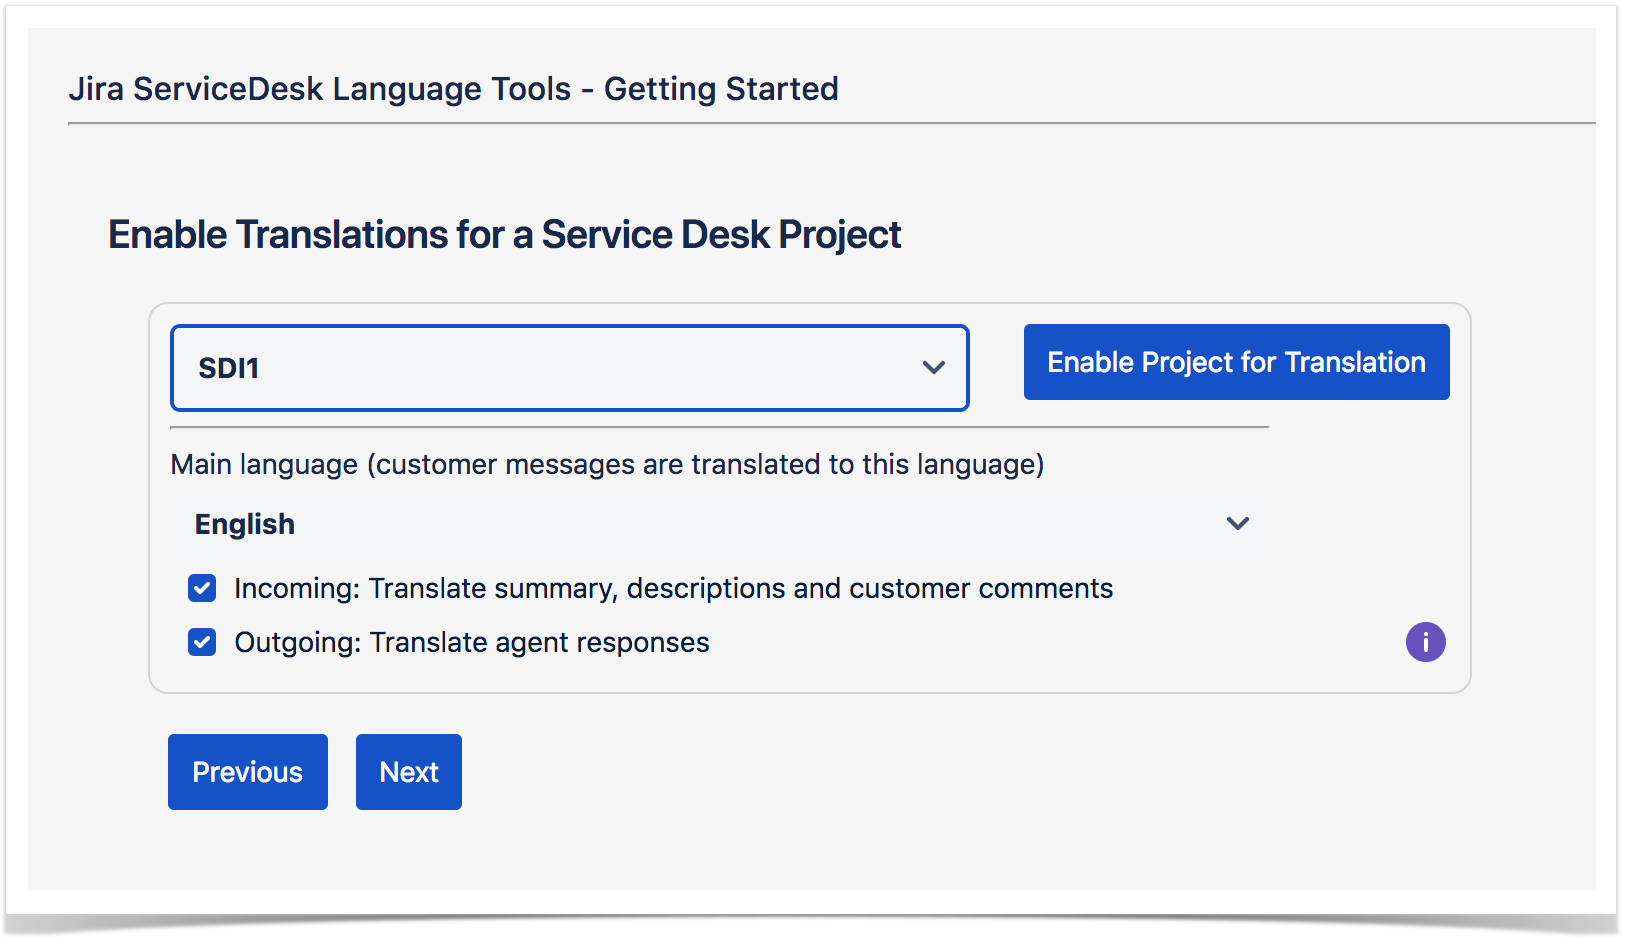 Enable Translation for Service Desk Projects